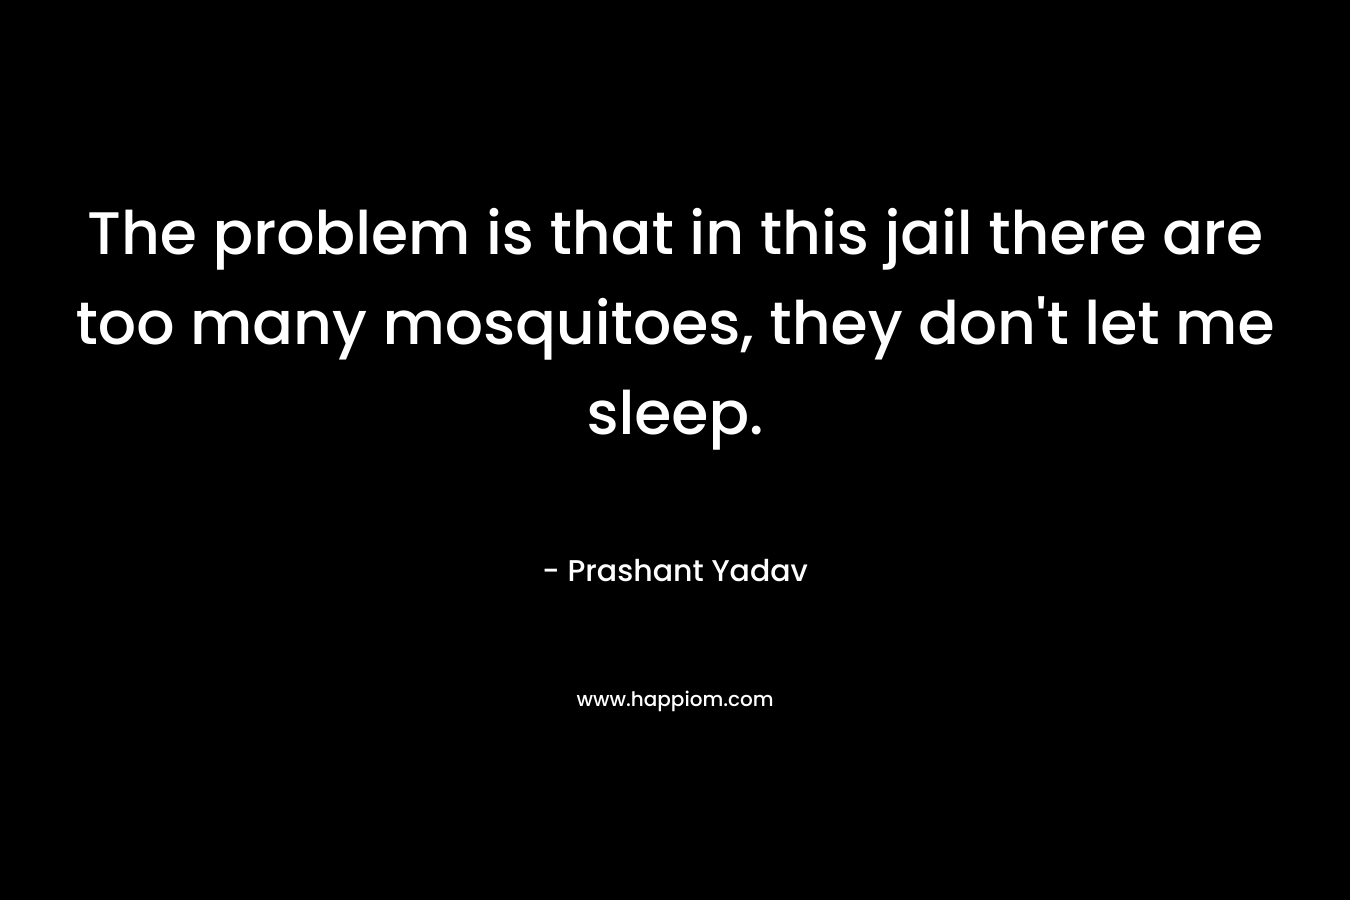 The problem is that in this jail there are too many mosquitoes, they don’t let me sleep. – Prashant Yadav